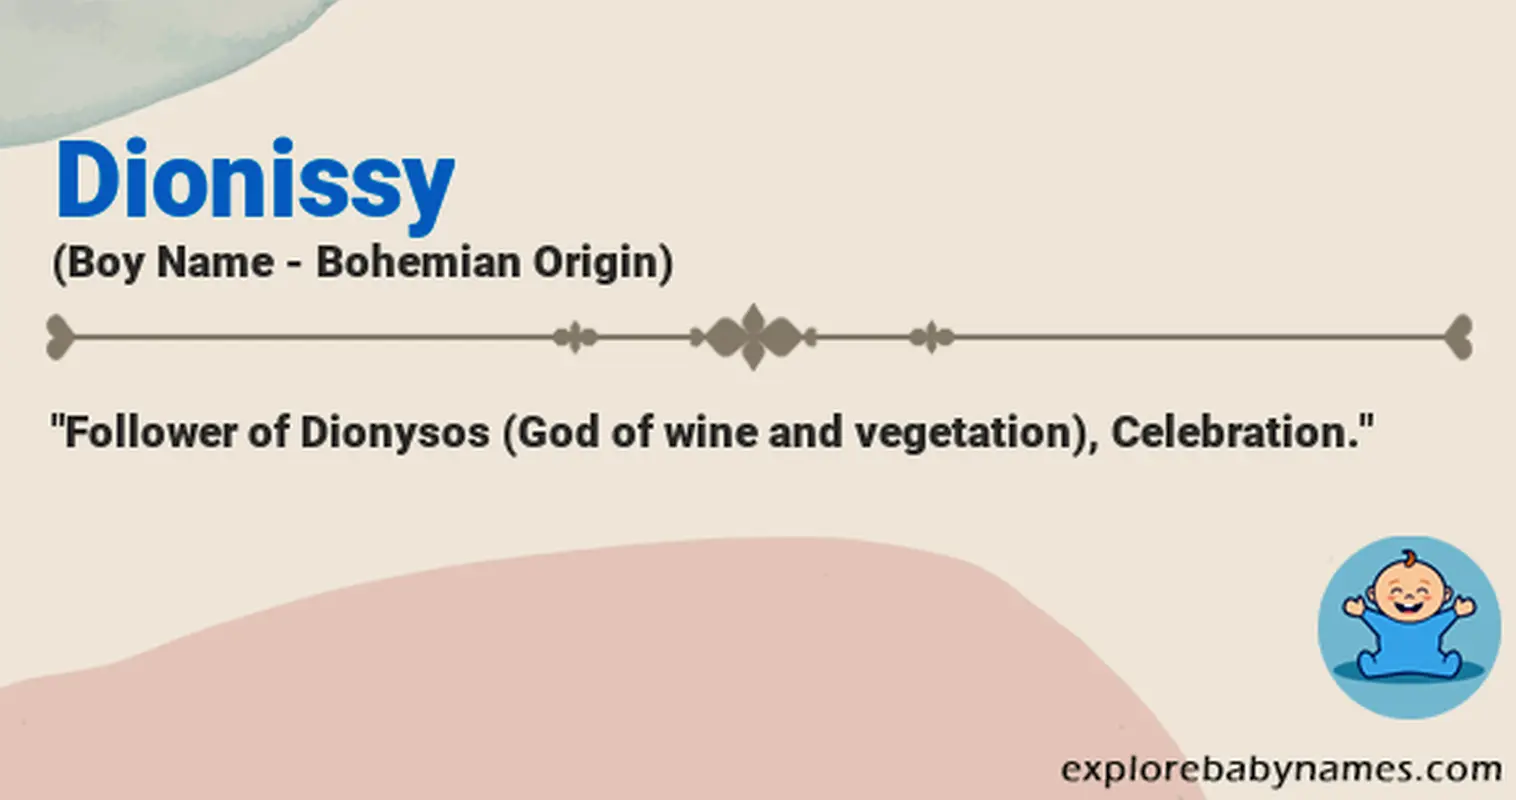 Meaning of Dionissy